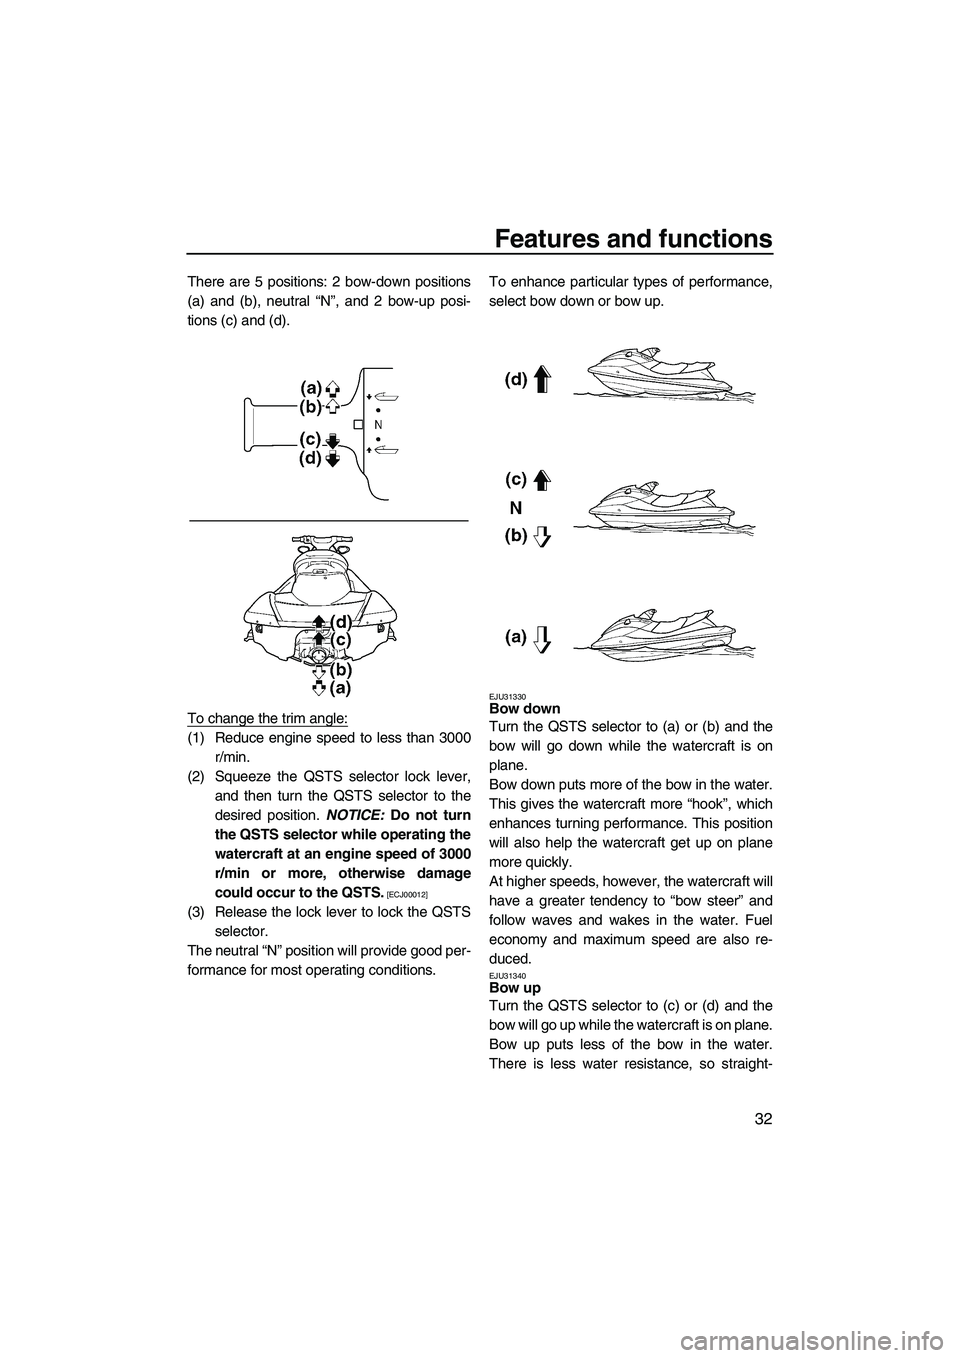 YAMAHA SVHO 2009  Owners Manual Features and functions
32
There are 5 positions: 2 bow-down positions
(a) and (b), neutral “N”, and 2 bow-up posi-
tions (c) and (d).
To change the trim angle:
(1) Reduce engine speed to less than